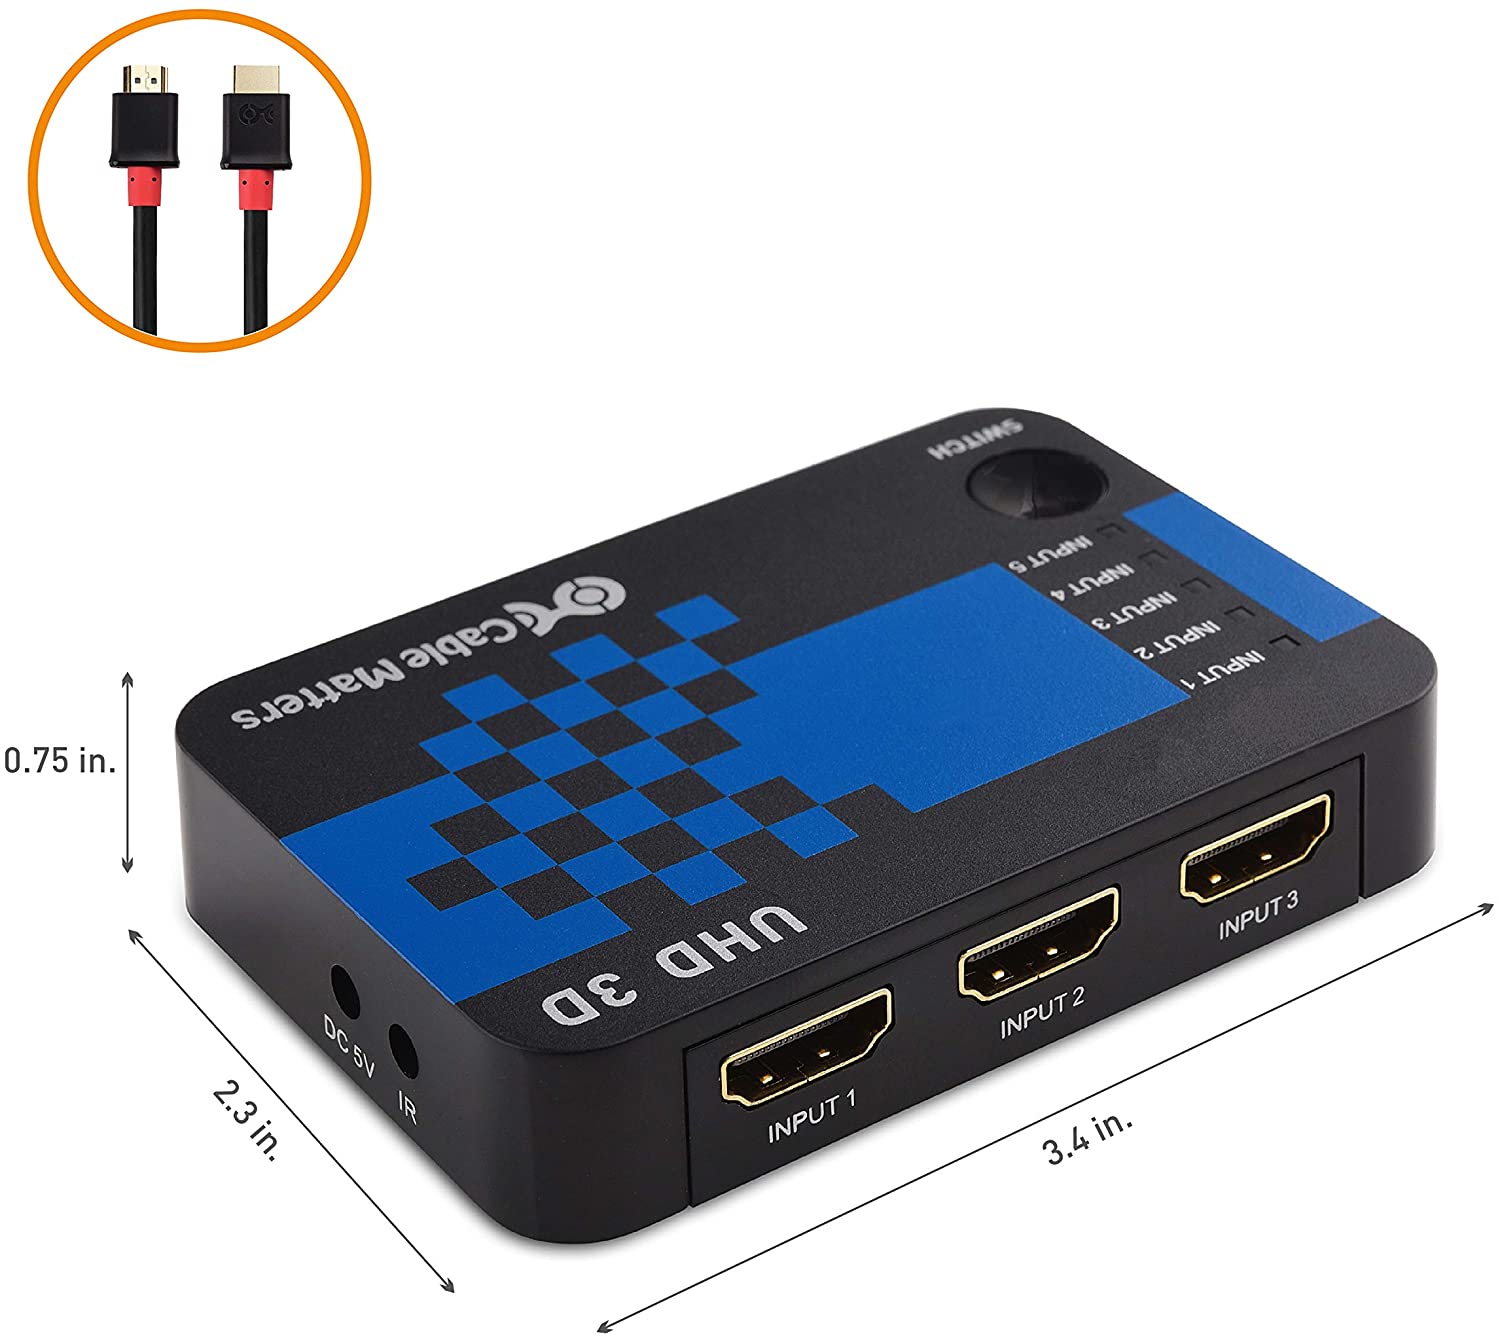 Cable Matters 5-Port HDMI Switch with 4K Resolution Support